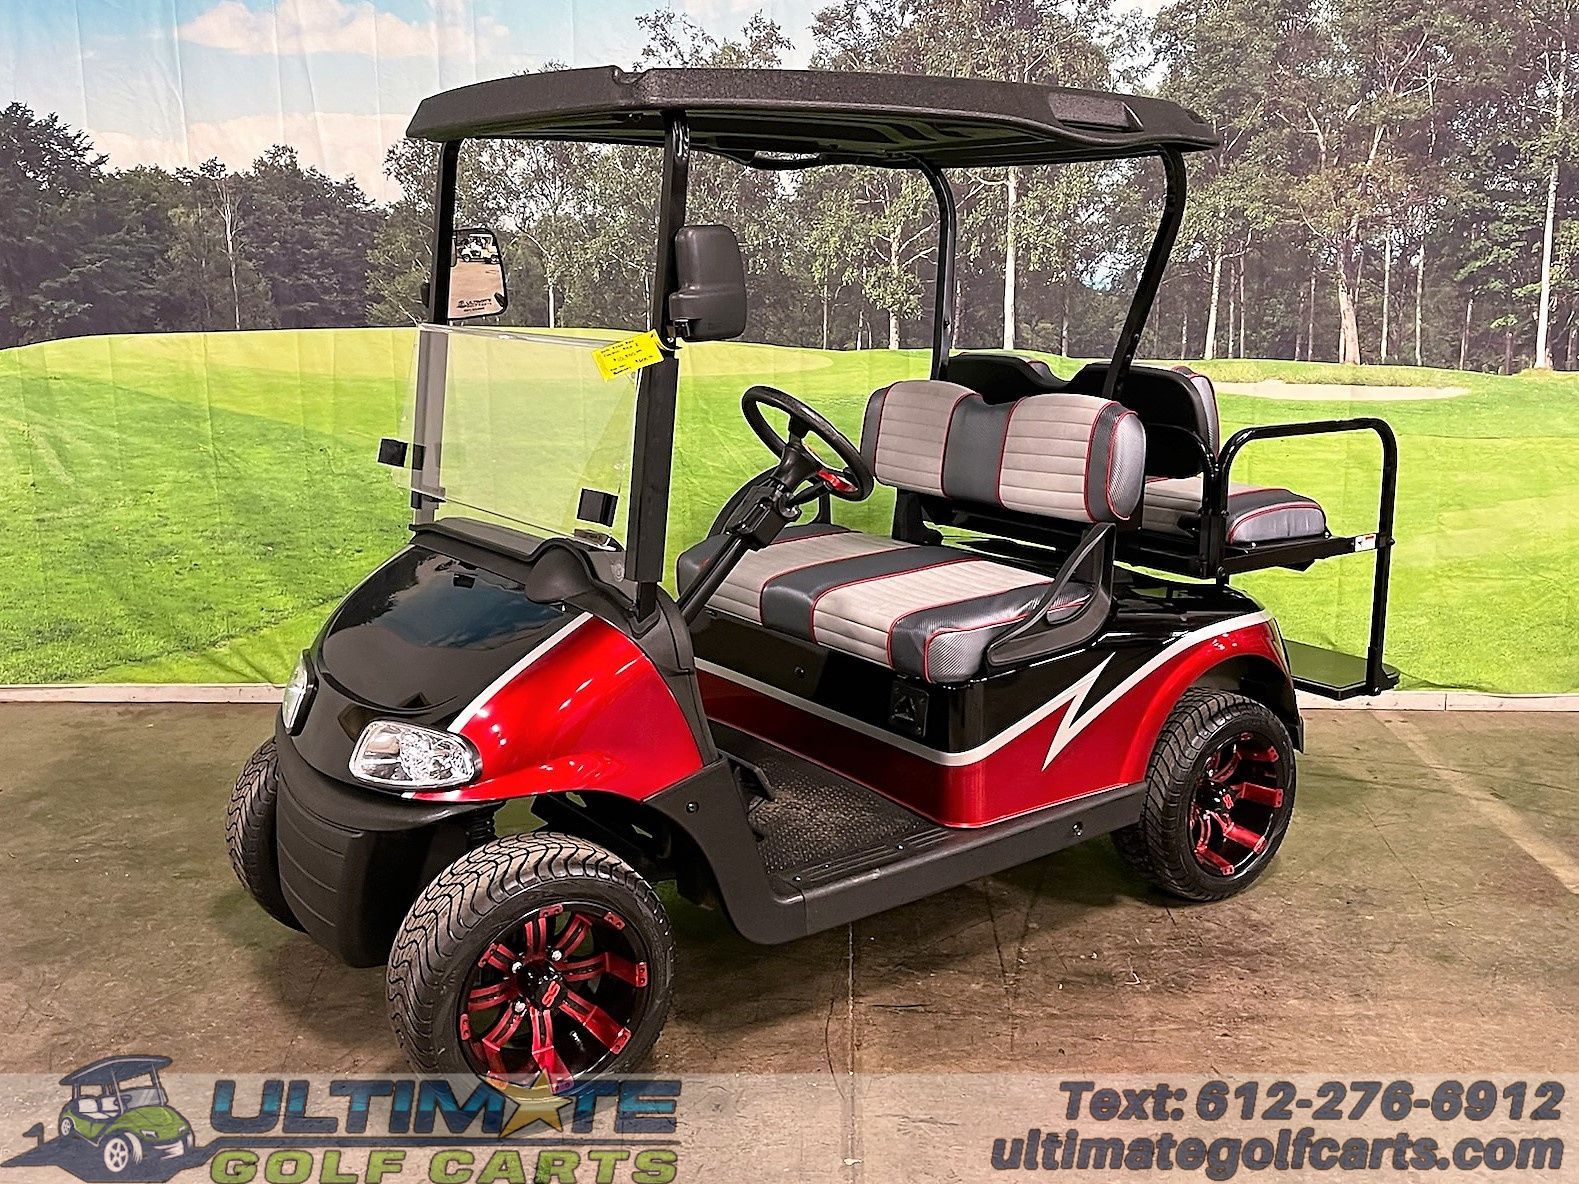 Services & Products Ultimate Golf Carts Brainerd in Brainerd MN